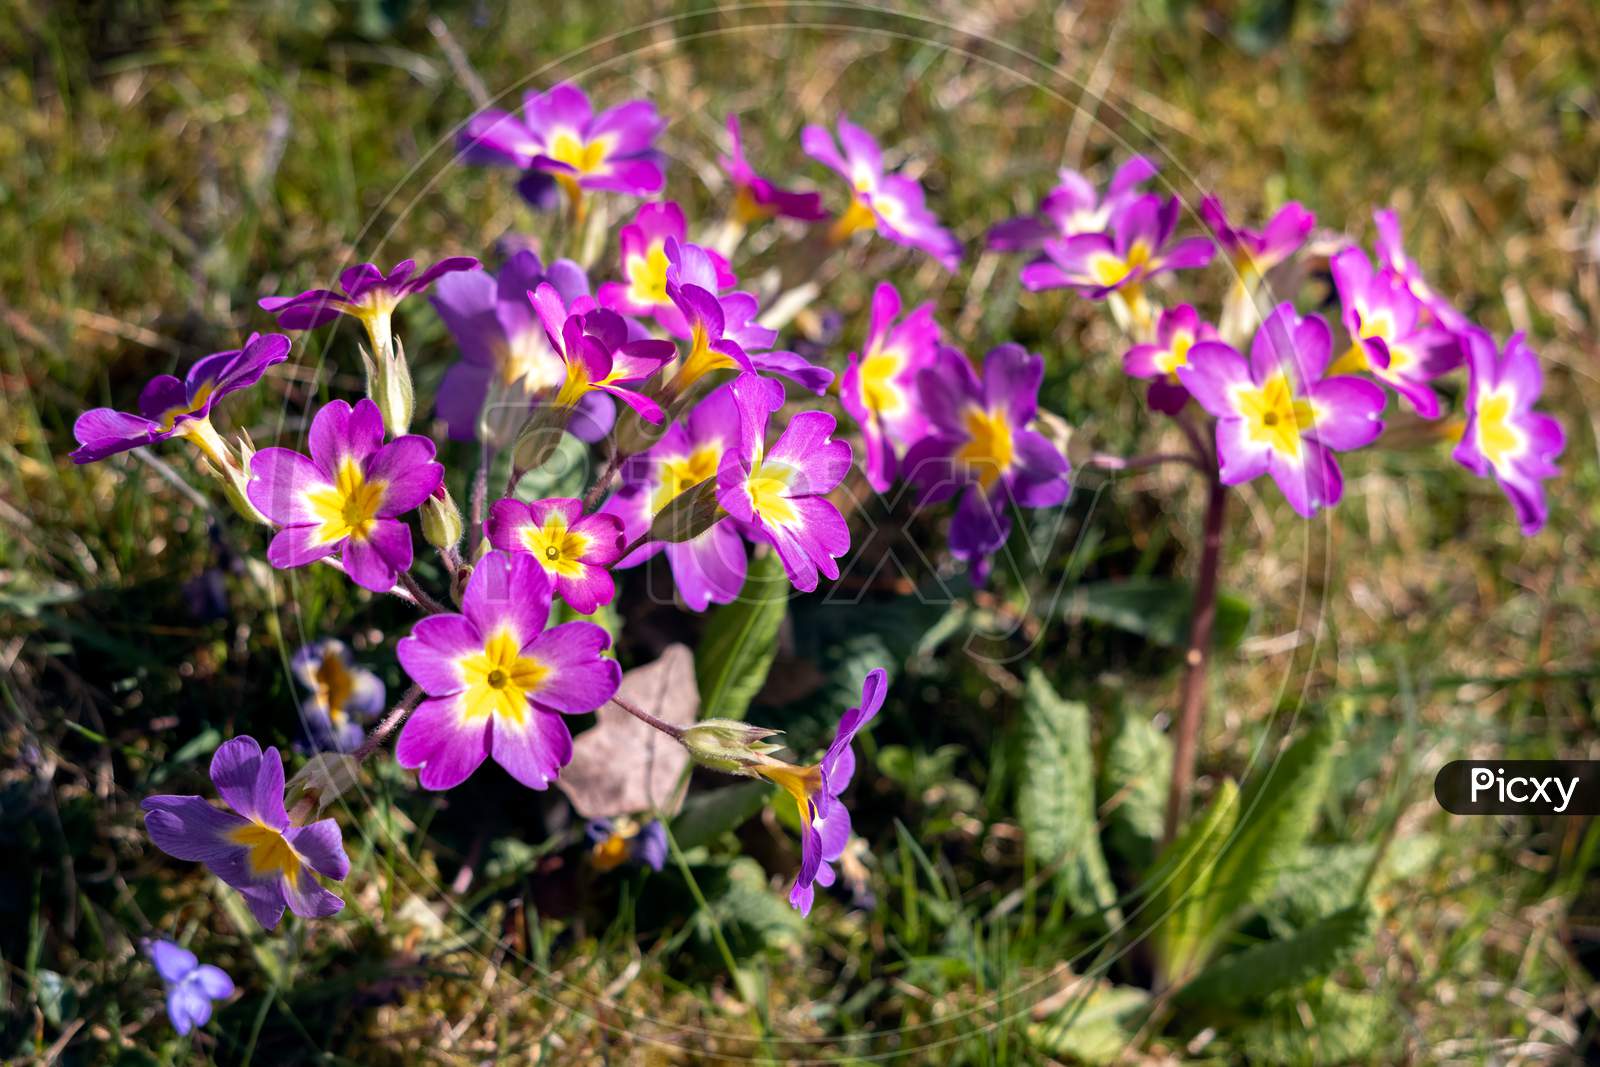 A Group Of Magenta Primroses Flowering In The Spring Sunshine